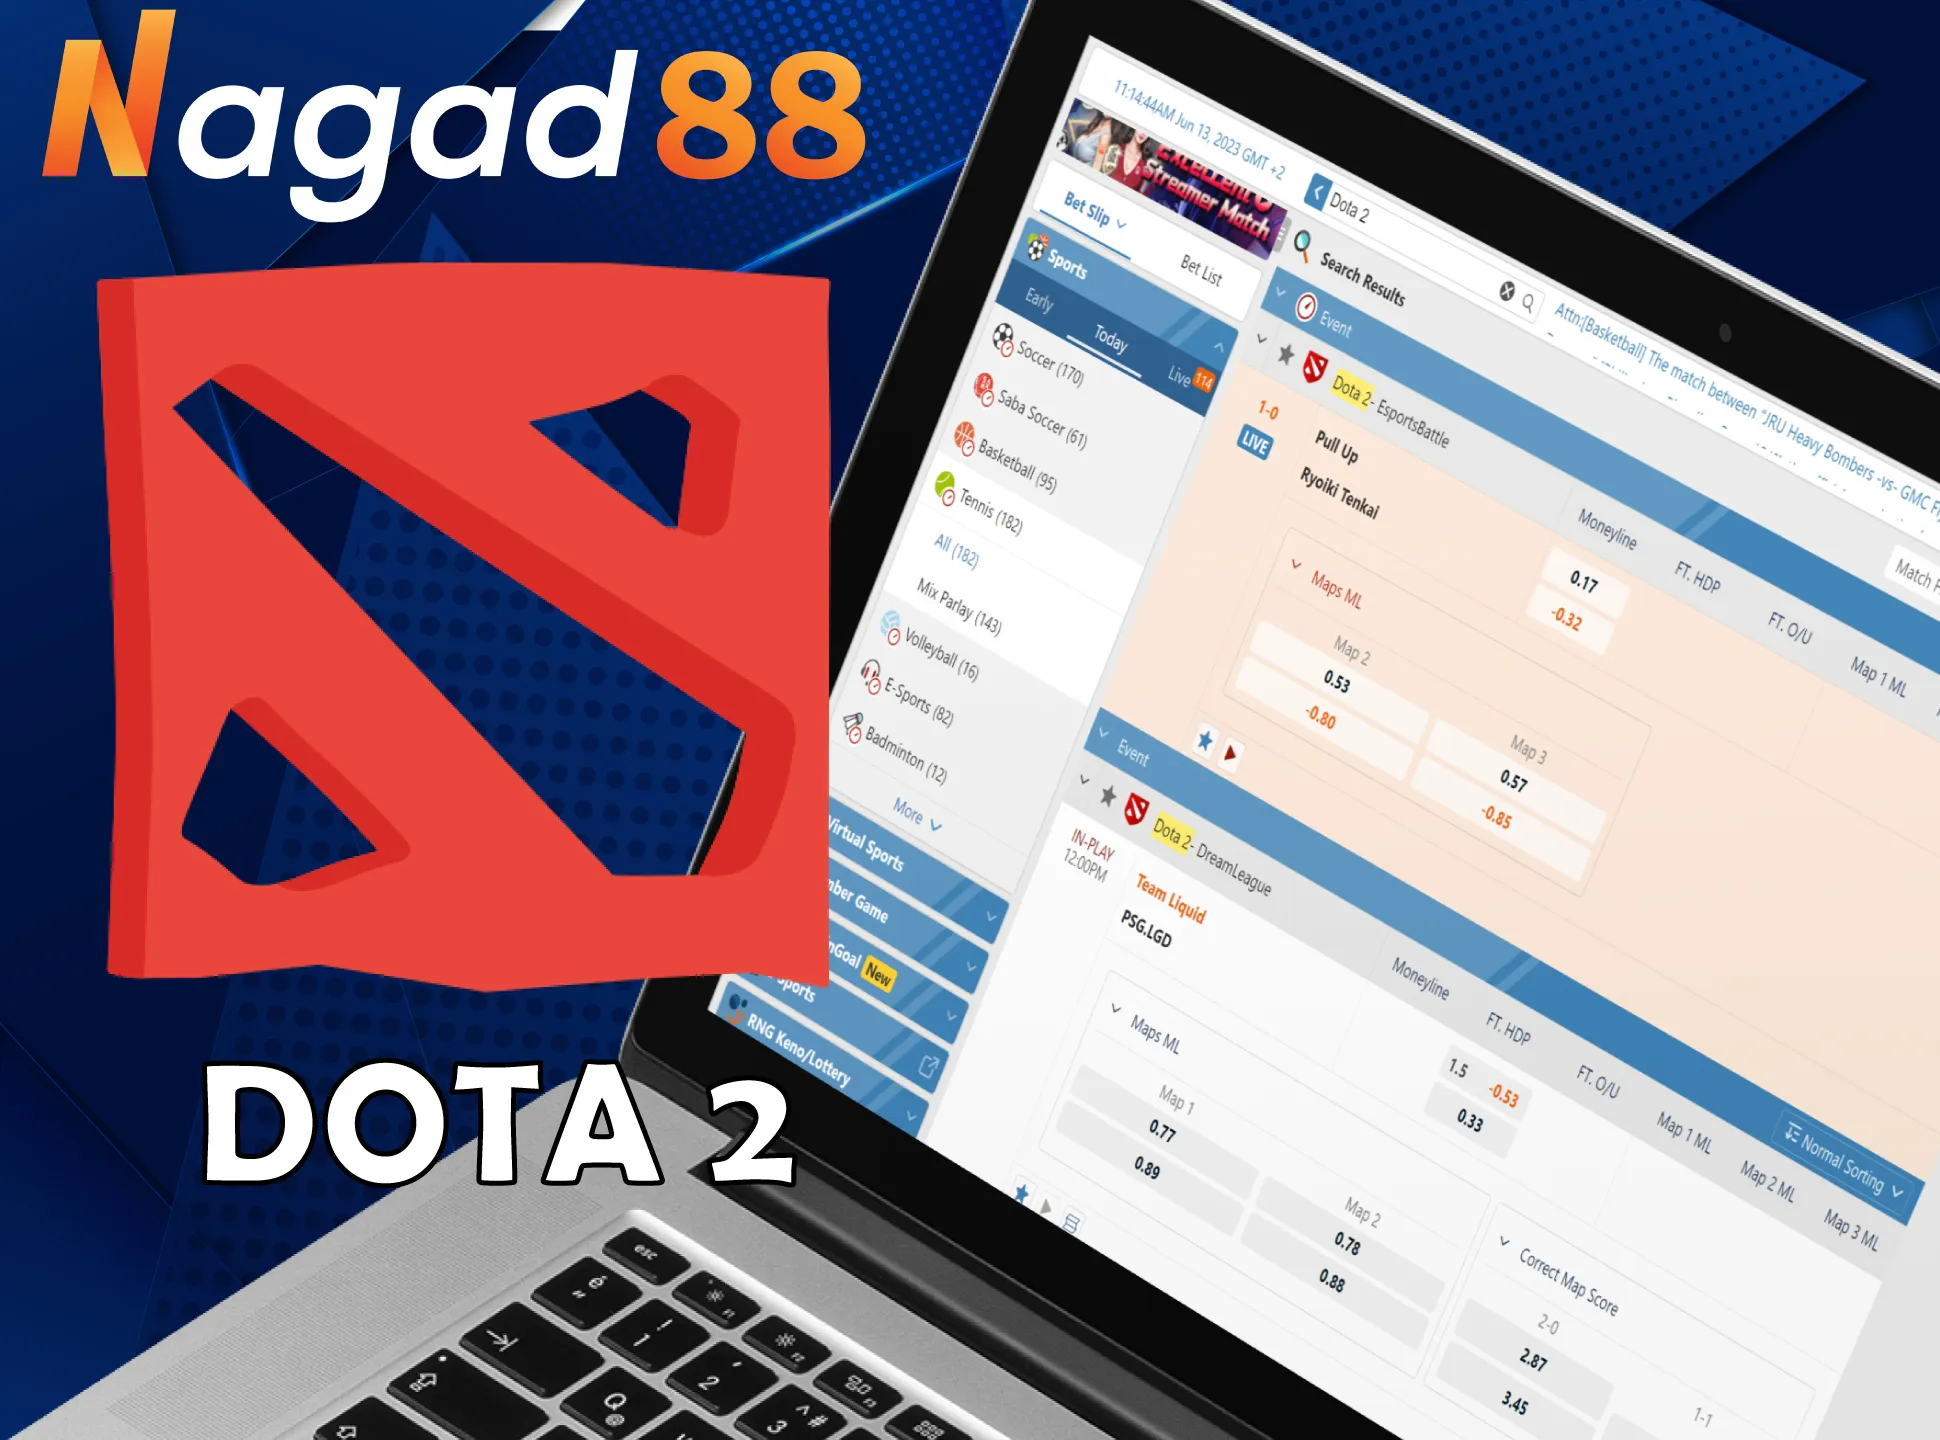 Place your bets on Dota 2 at Nagad88.